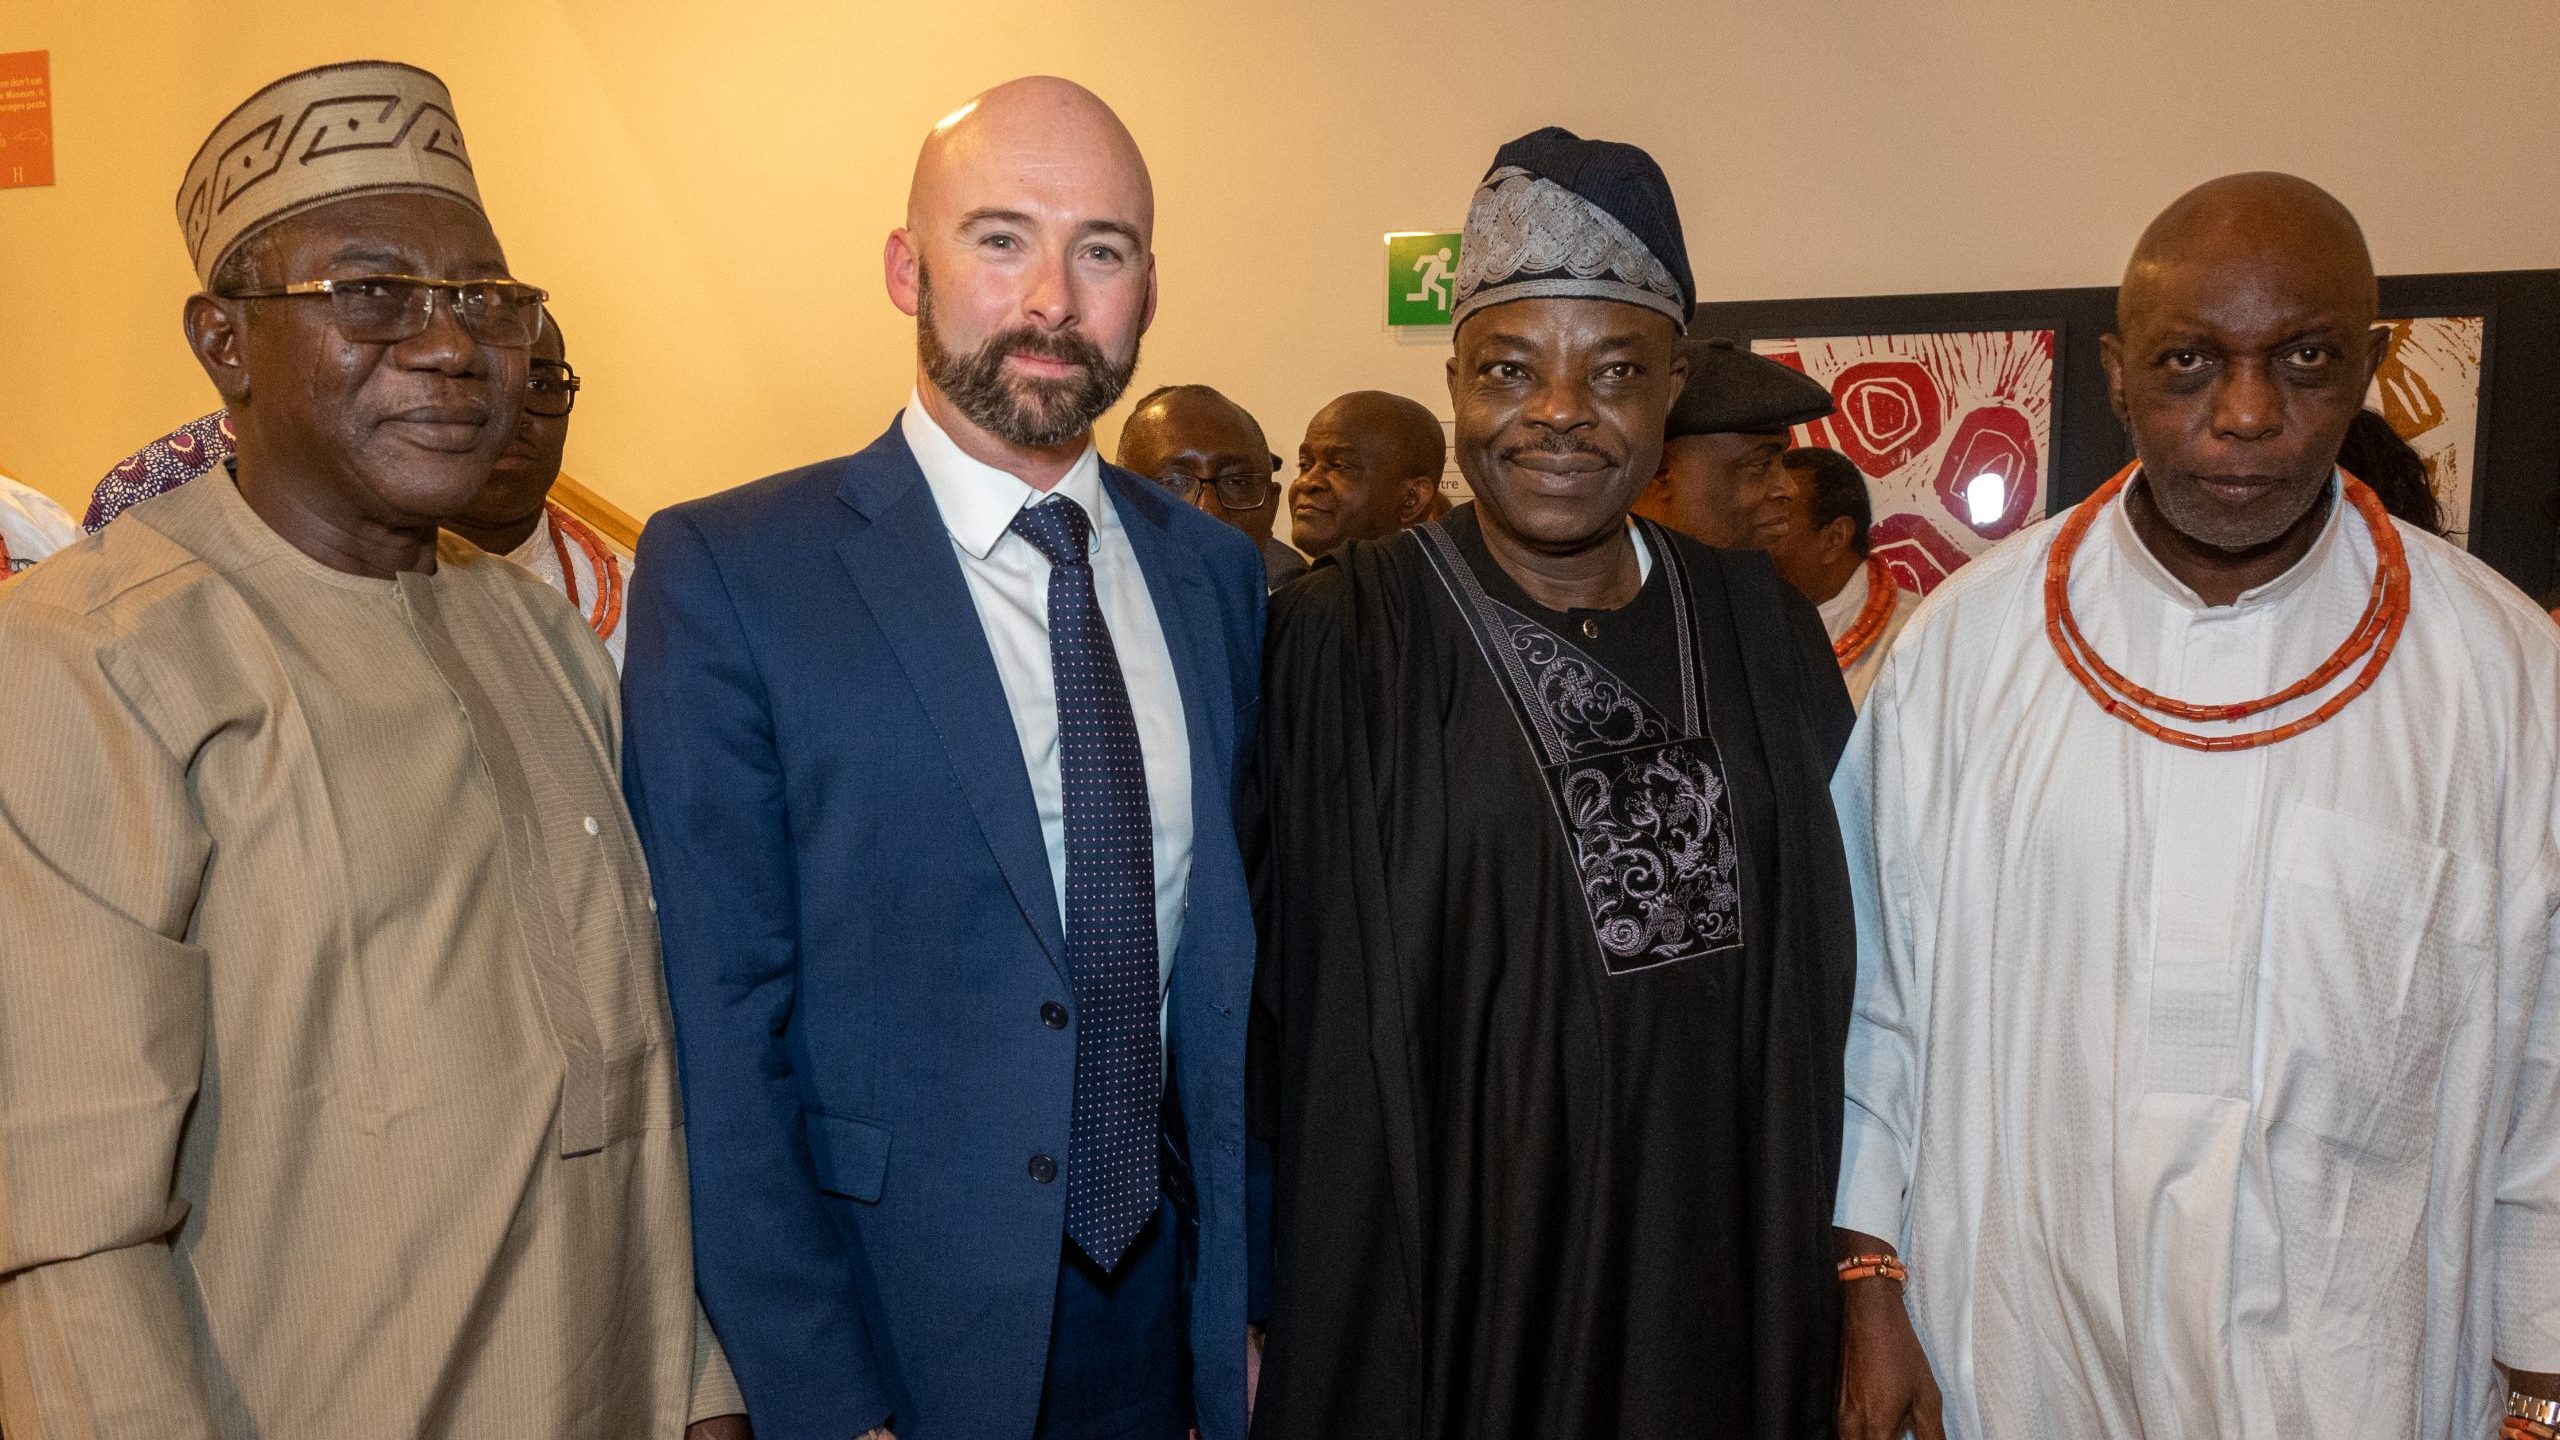 Left to right: Professor Abba Tijani, director-general of Nigeria’s National Commission for Museums and Monuments (NCMM); Michael Salter-Church, chair of the trustees of the Horniman Museum and Gardens; His Excellency Sarafa Tunji Isola, high commissioner of Nigeria in London; His Highness Prince Aghatise Erediauwa, representative of the Oba of Benin